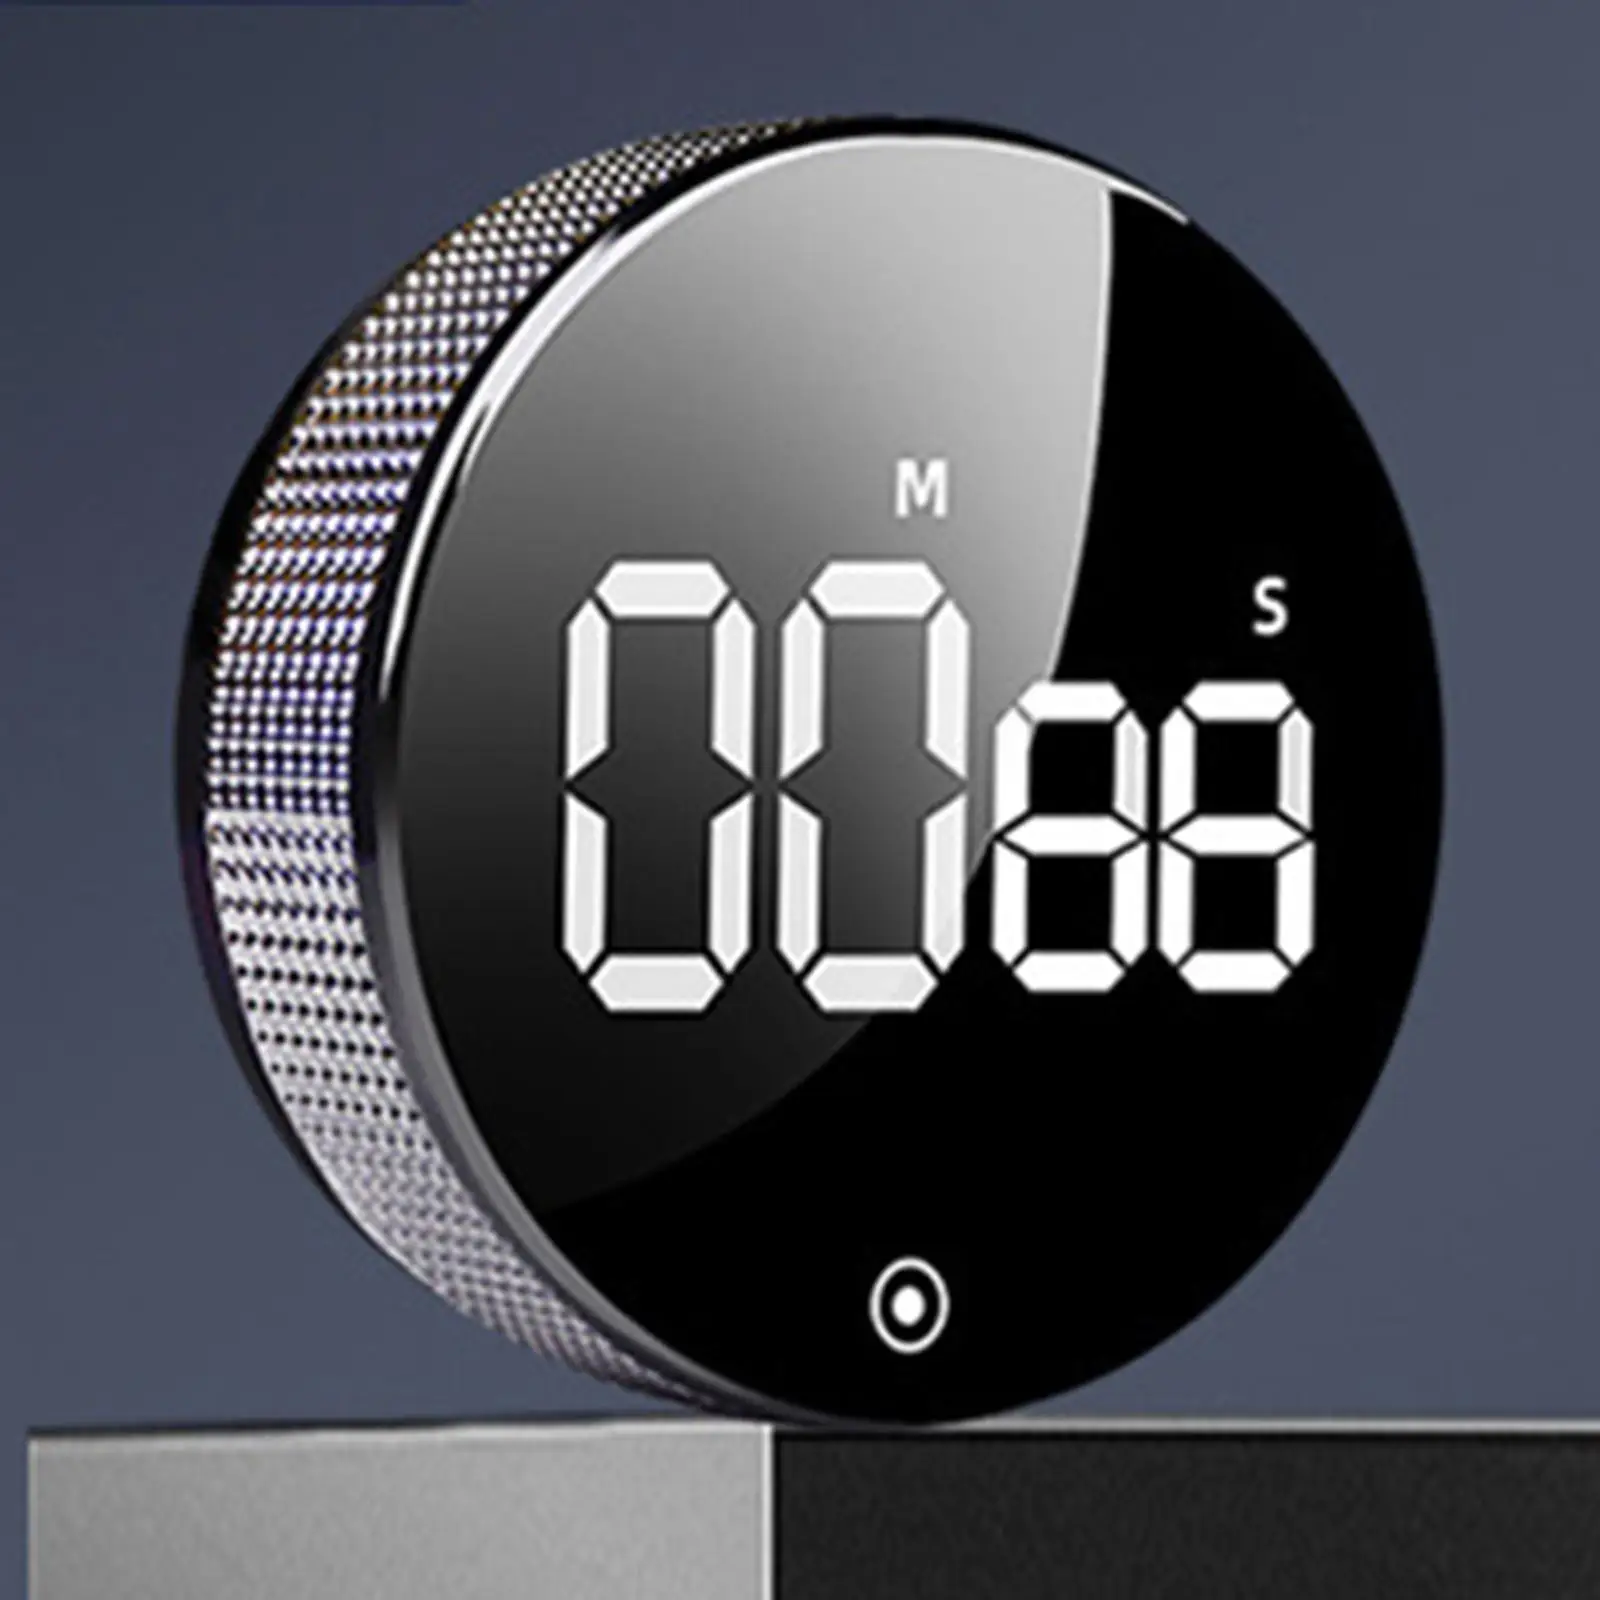 Round Digital Kitchen Timer Magnetic Attraction Count Down Silent Alarm Clock Desktop Table Clock for Bathroom Adults Teachers